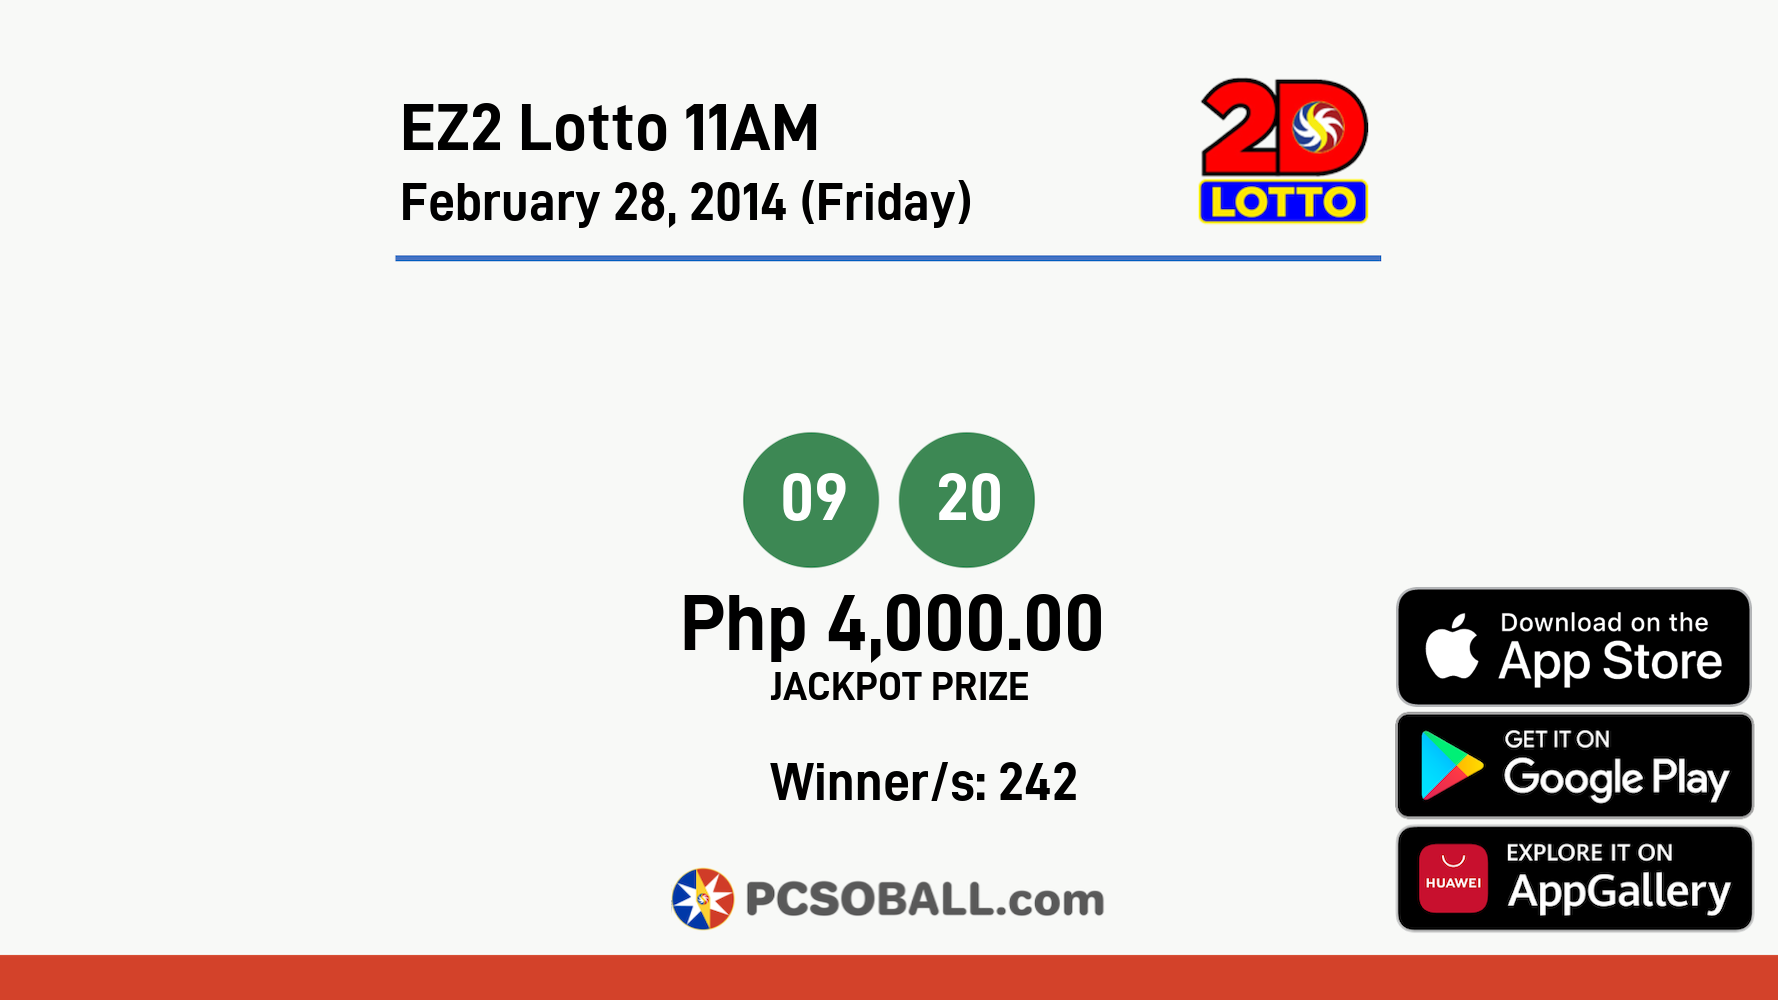 EZ2 Lotto 11AM February 28, 2014 (Friday) Result